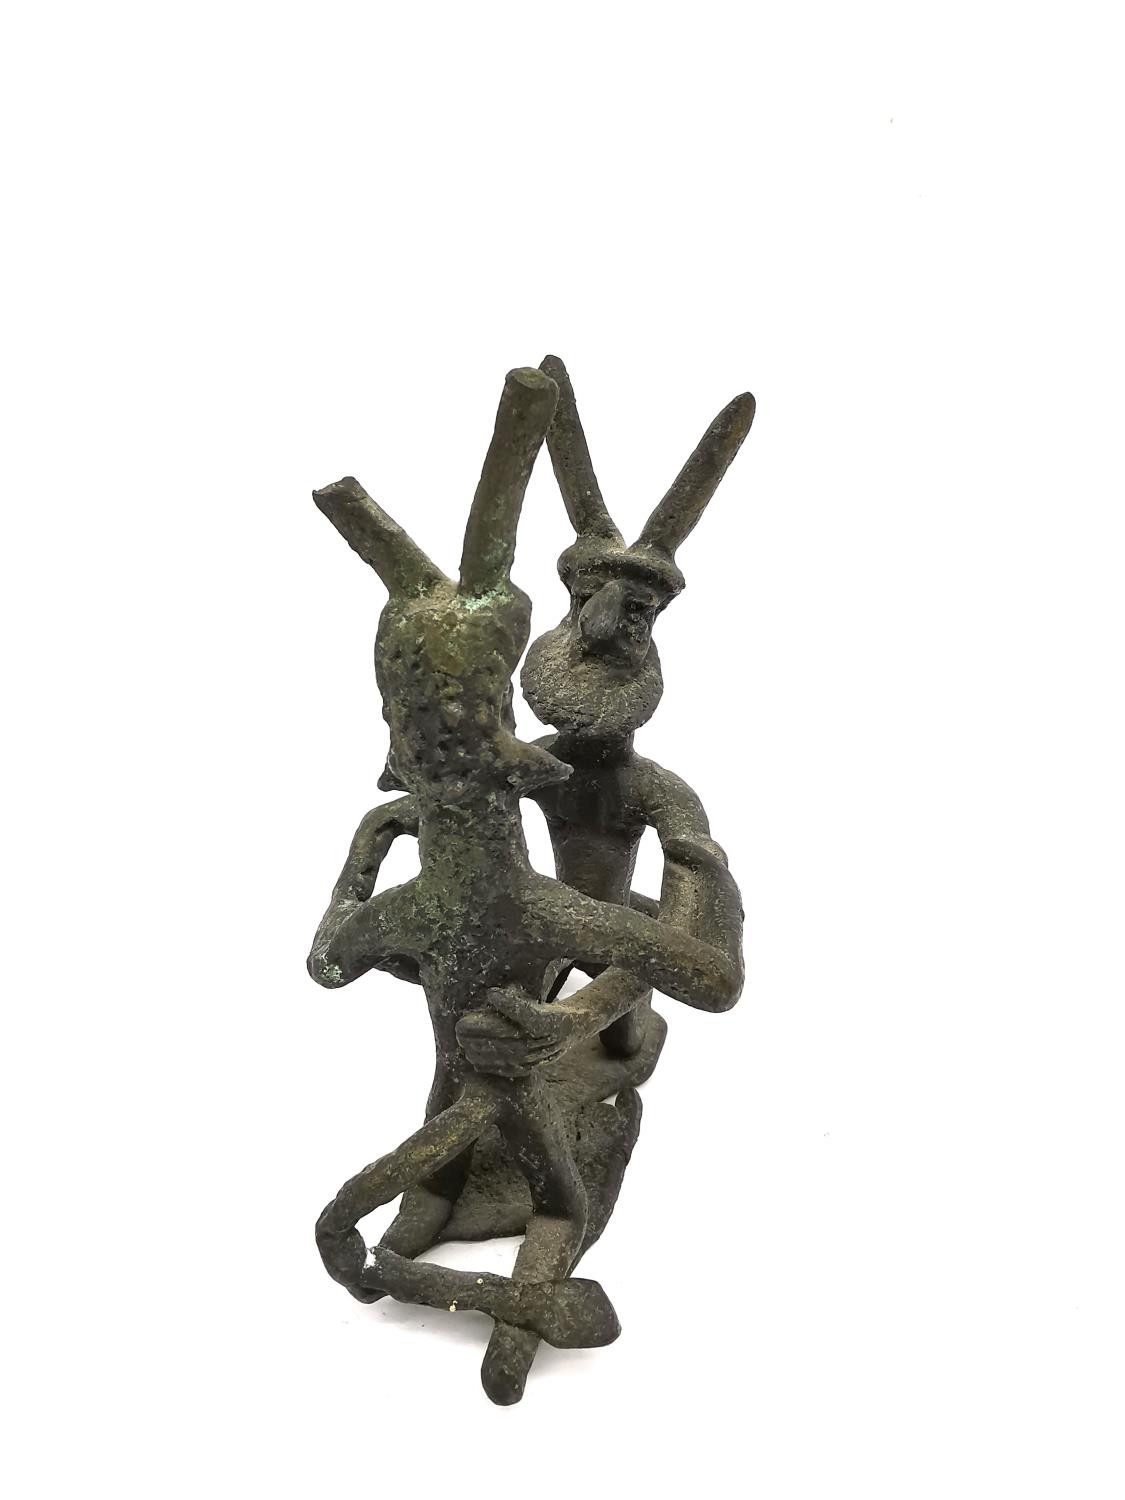 A Tribal bronze erotic sculpture of two bearded mythical creatures fighting. H.12 L.10.5 W.7cm. - Image 2 of 7